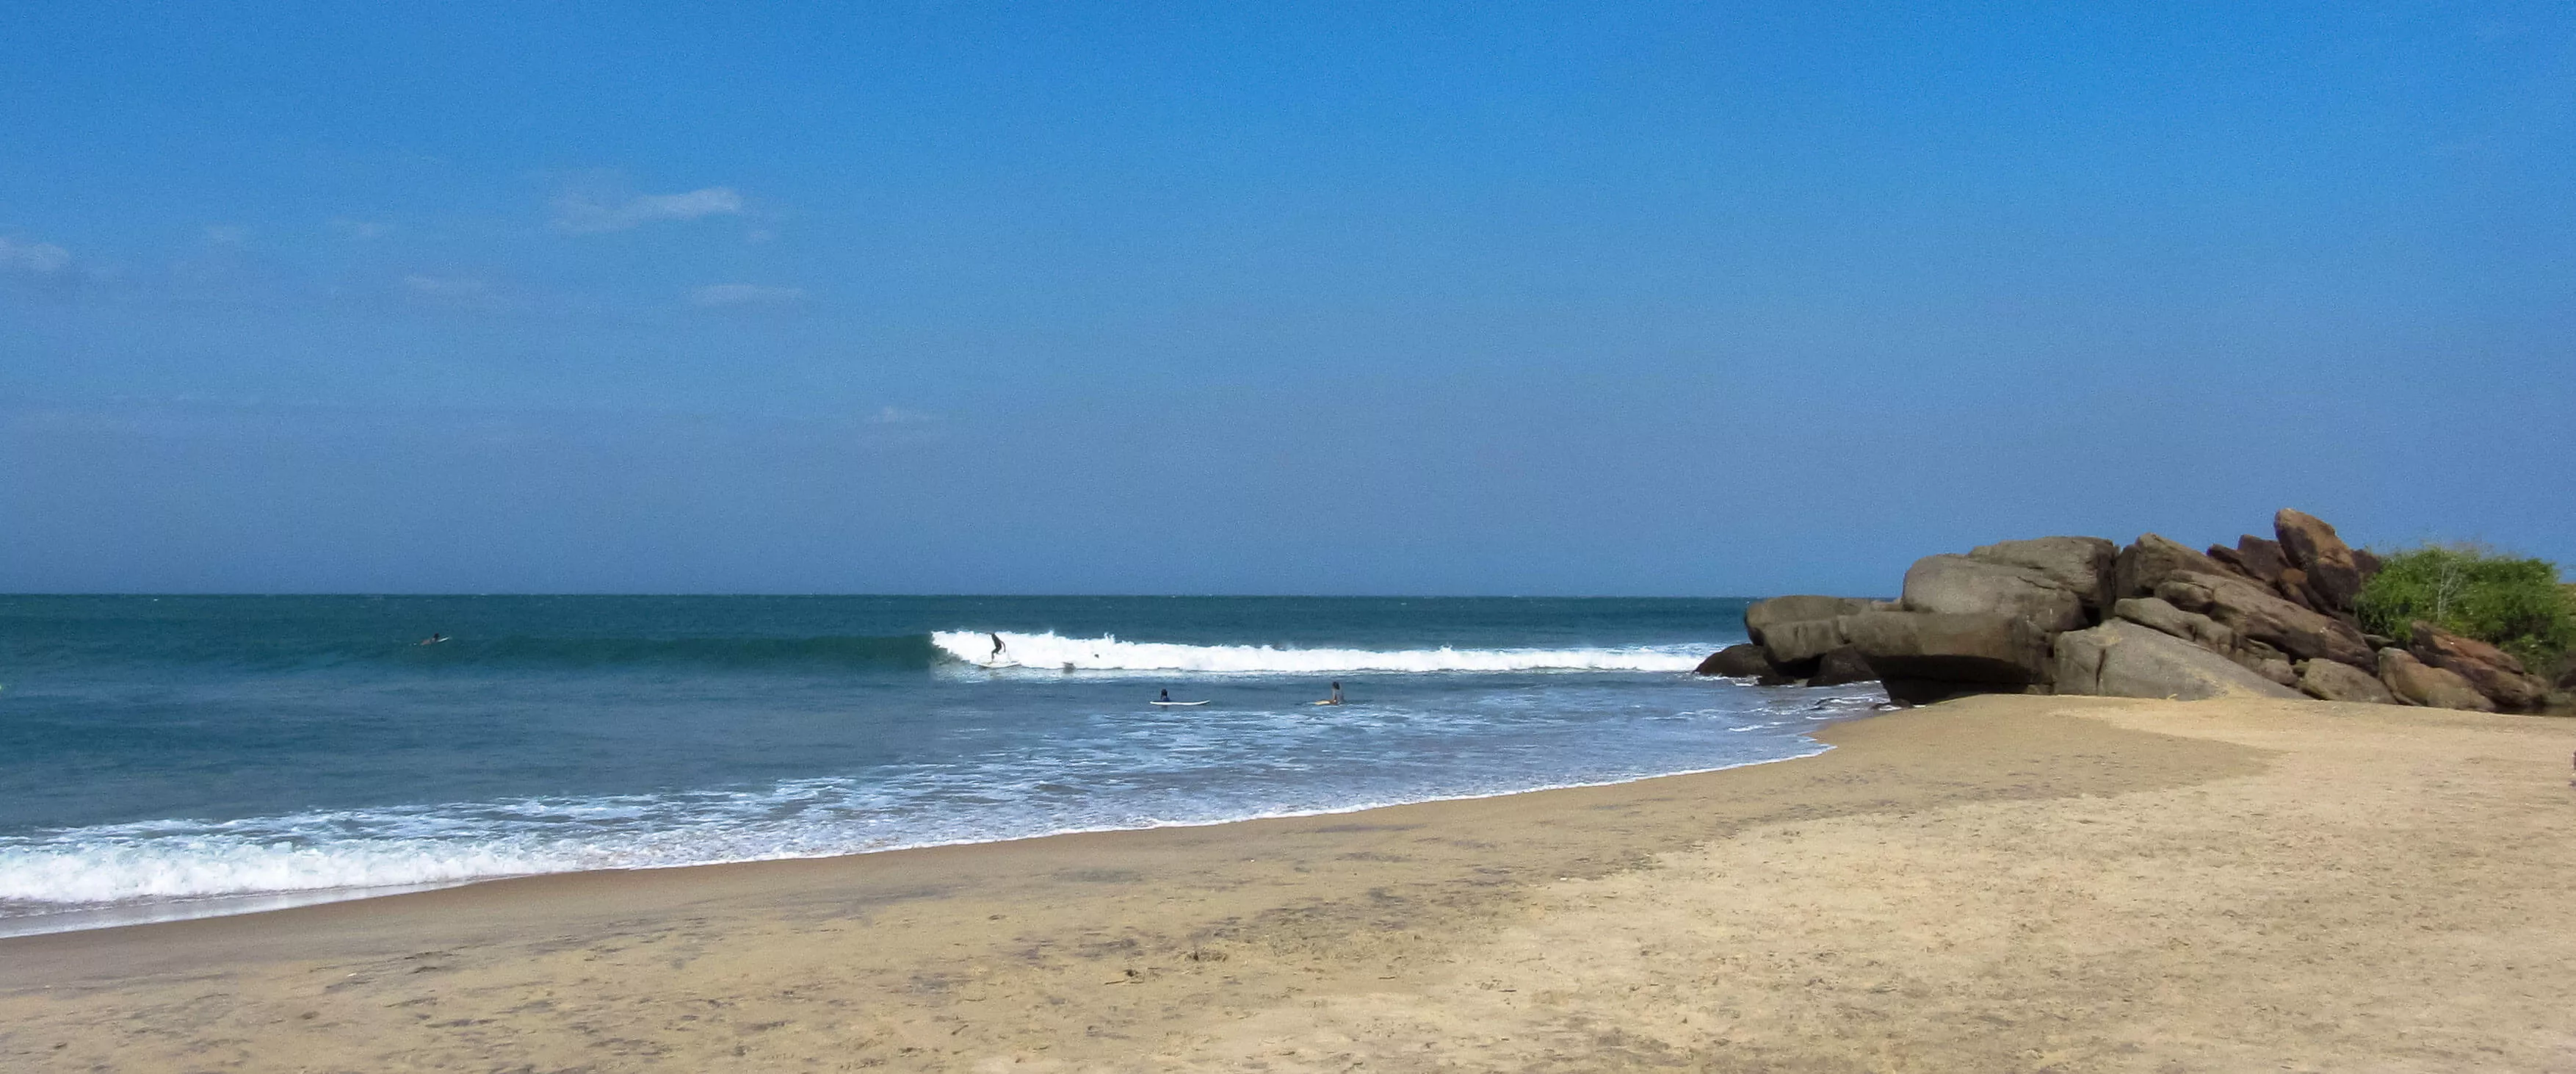 Arugam Bay Beach in Sri Lanka, Central Asia | Surfing,Beaches - Rated 3.8